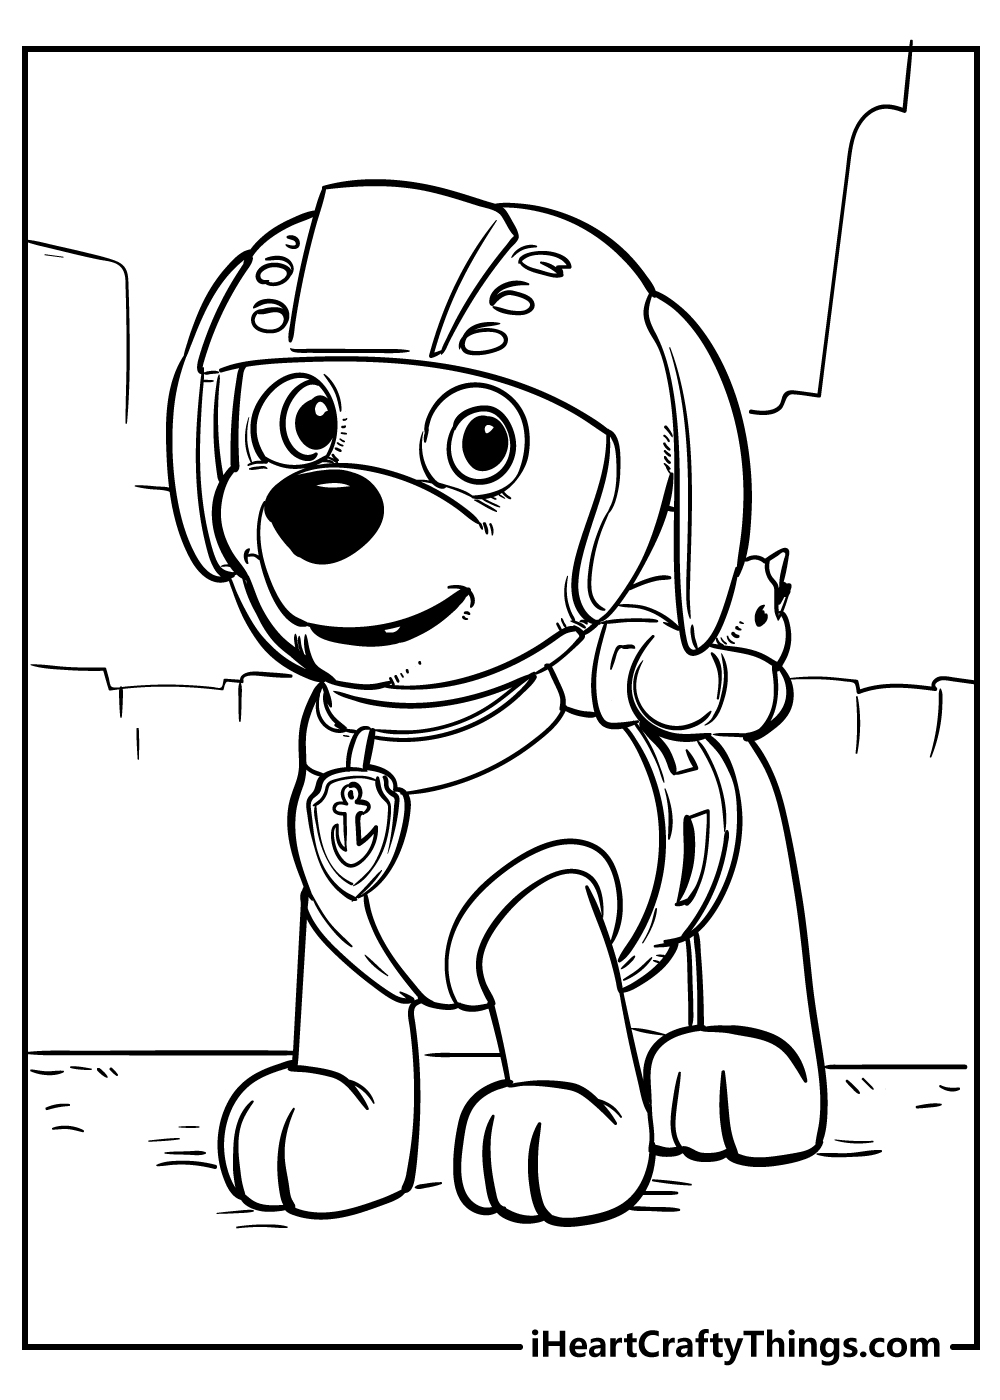 Paw Patrol Coloring Pages FREE Printable 110